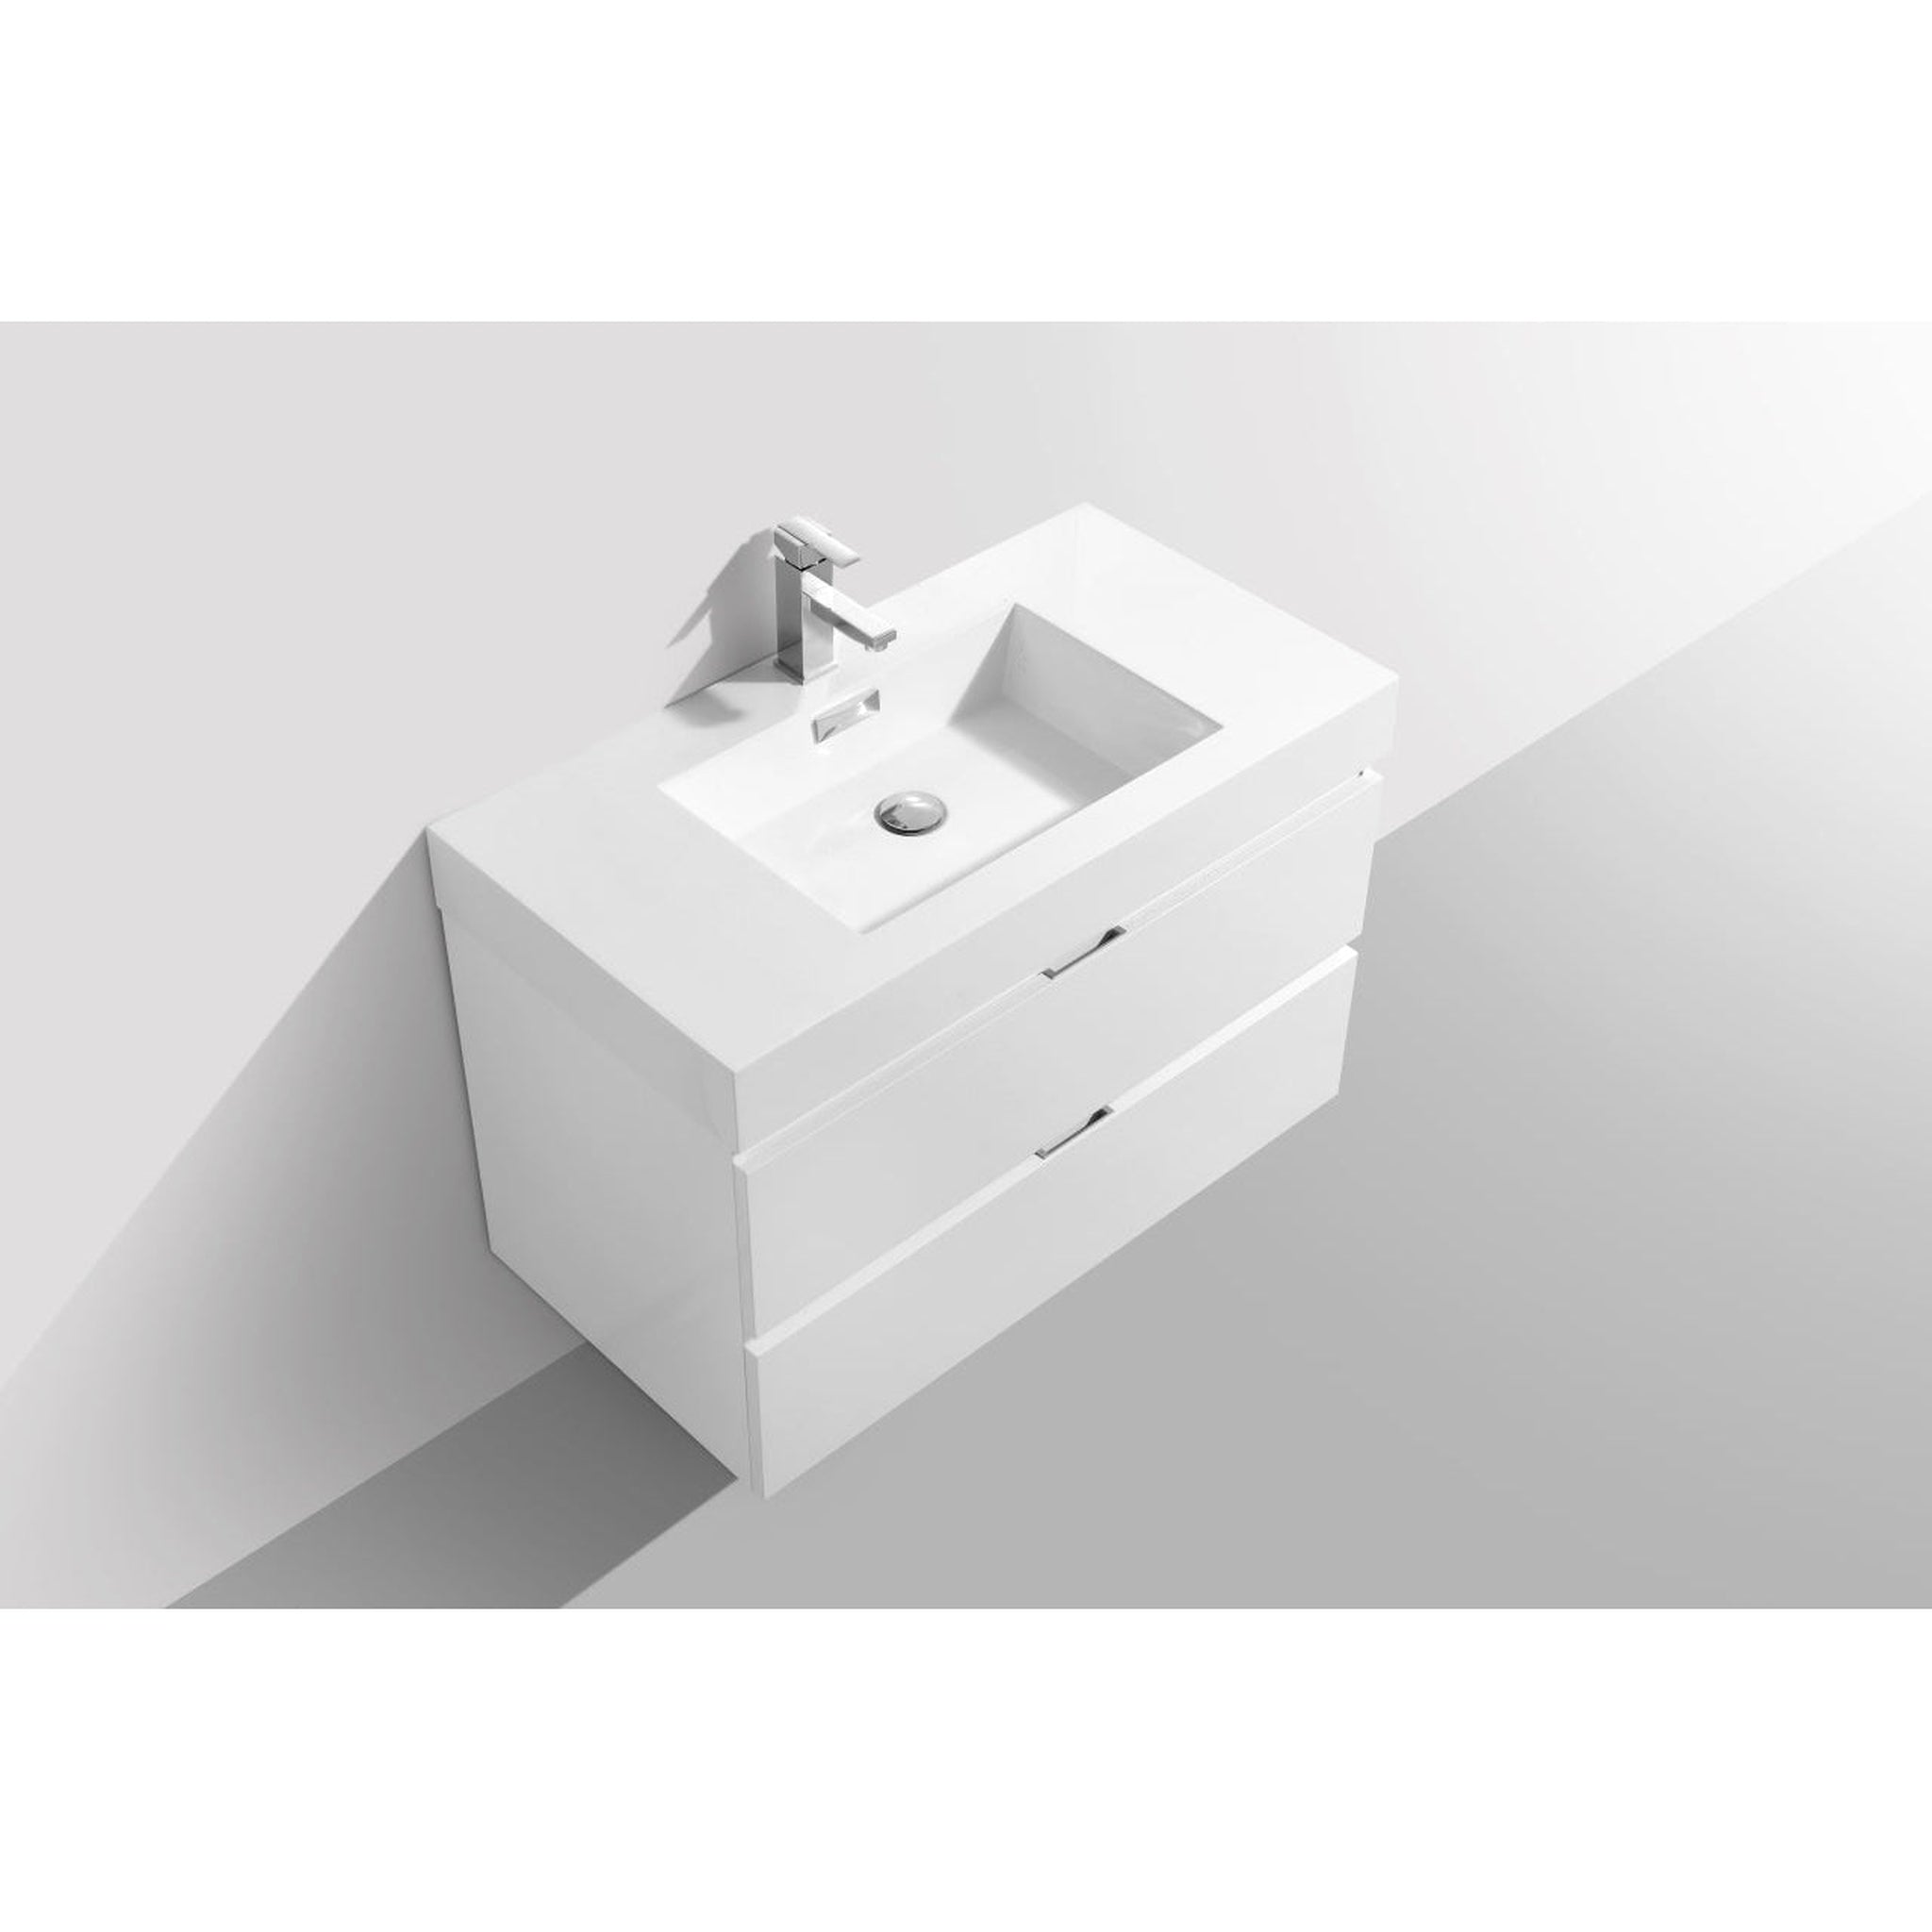 KubeBath, KubeBath Bliss 36" High Gloss White Wall-Mounted Modern Bathroom Vanity With Single Integrated Acrylic Sink With Overflow and 36" White Framed Mirror With Shelf